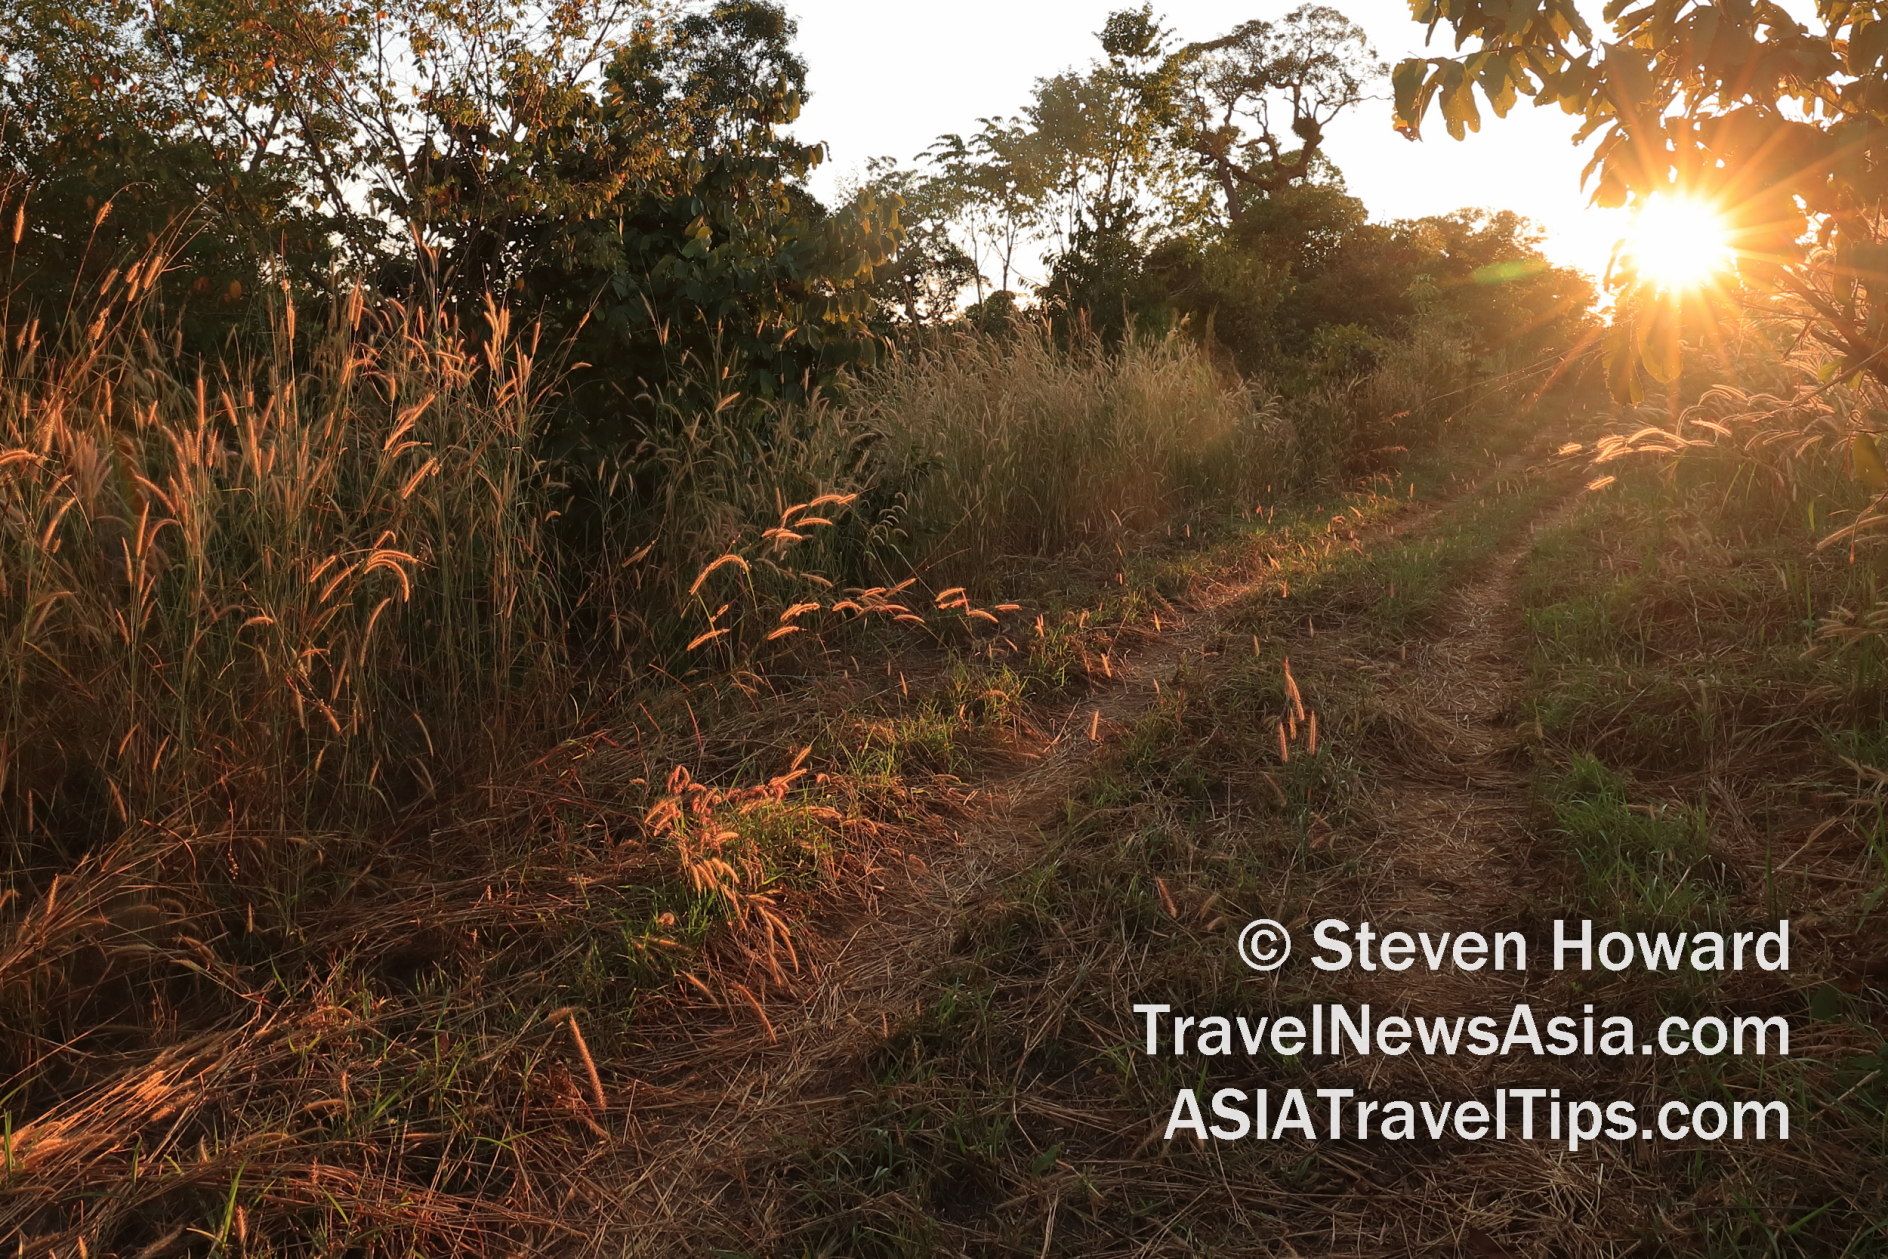 Sunrise in rural Sisaket (ศรีสะเกษ), Thailand. Picture by Steven Howard of TravelNewsAsia.com Click to enlarge.